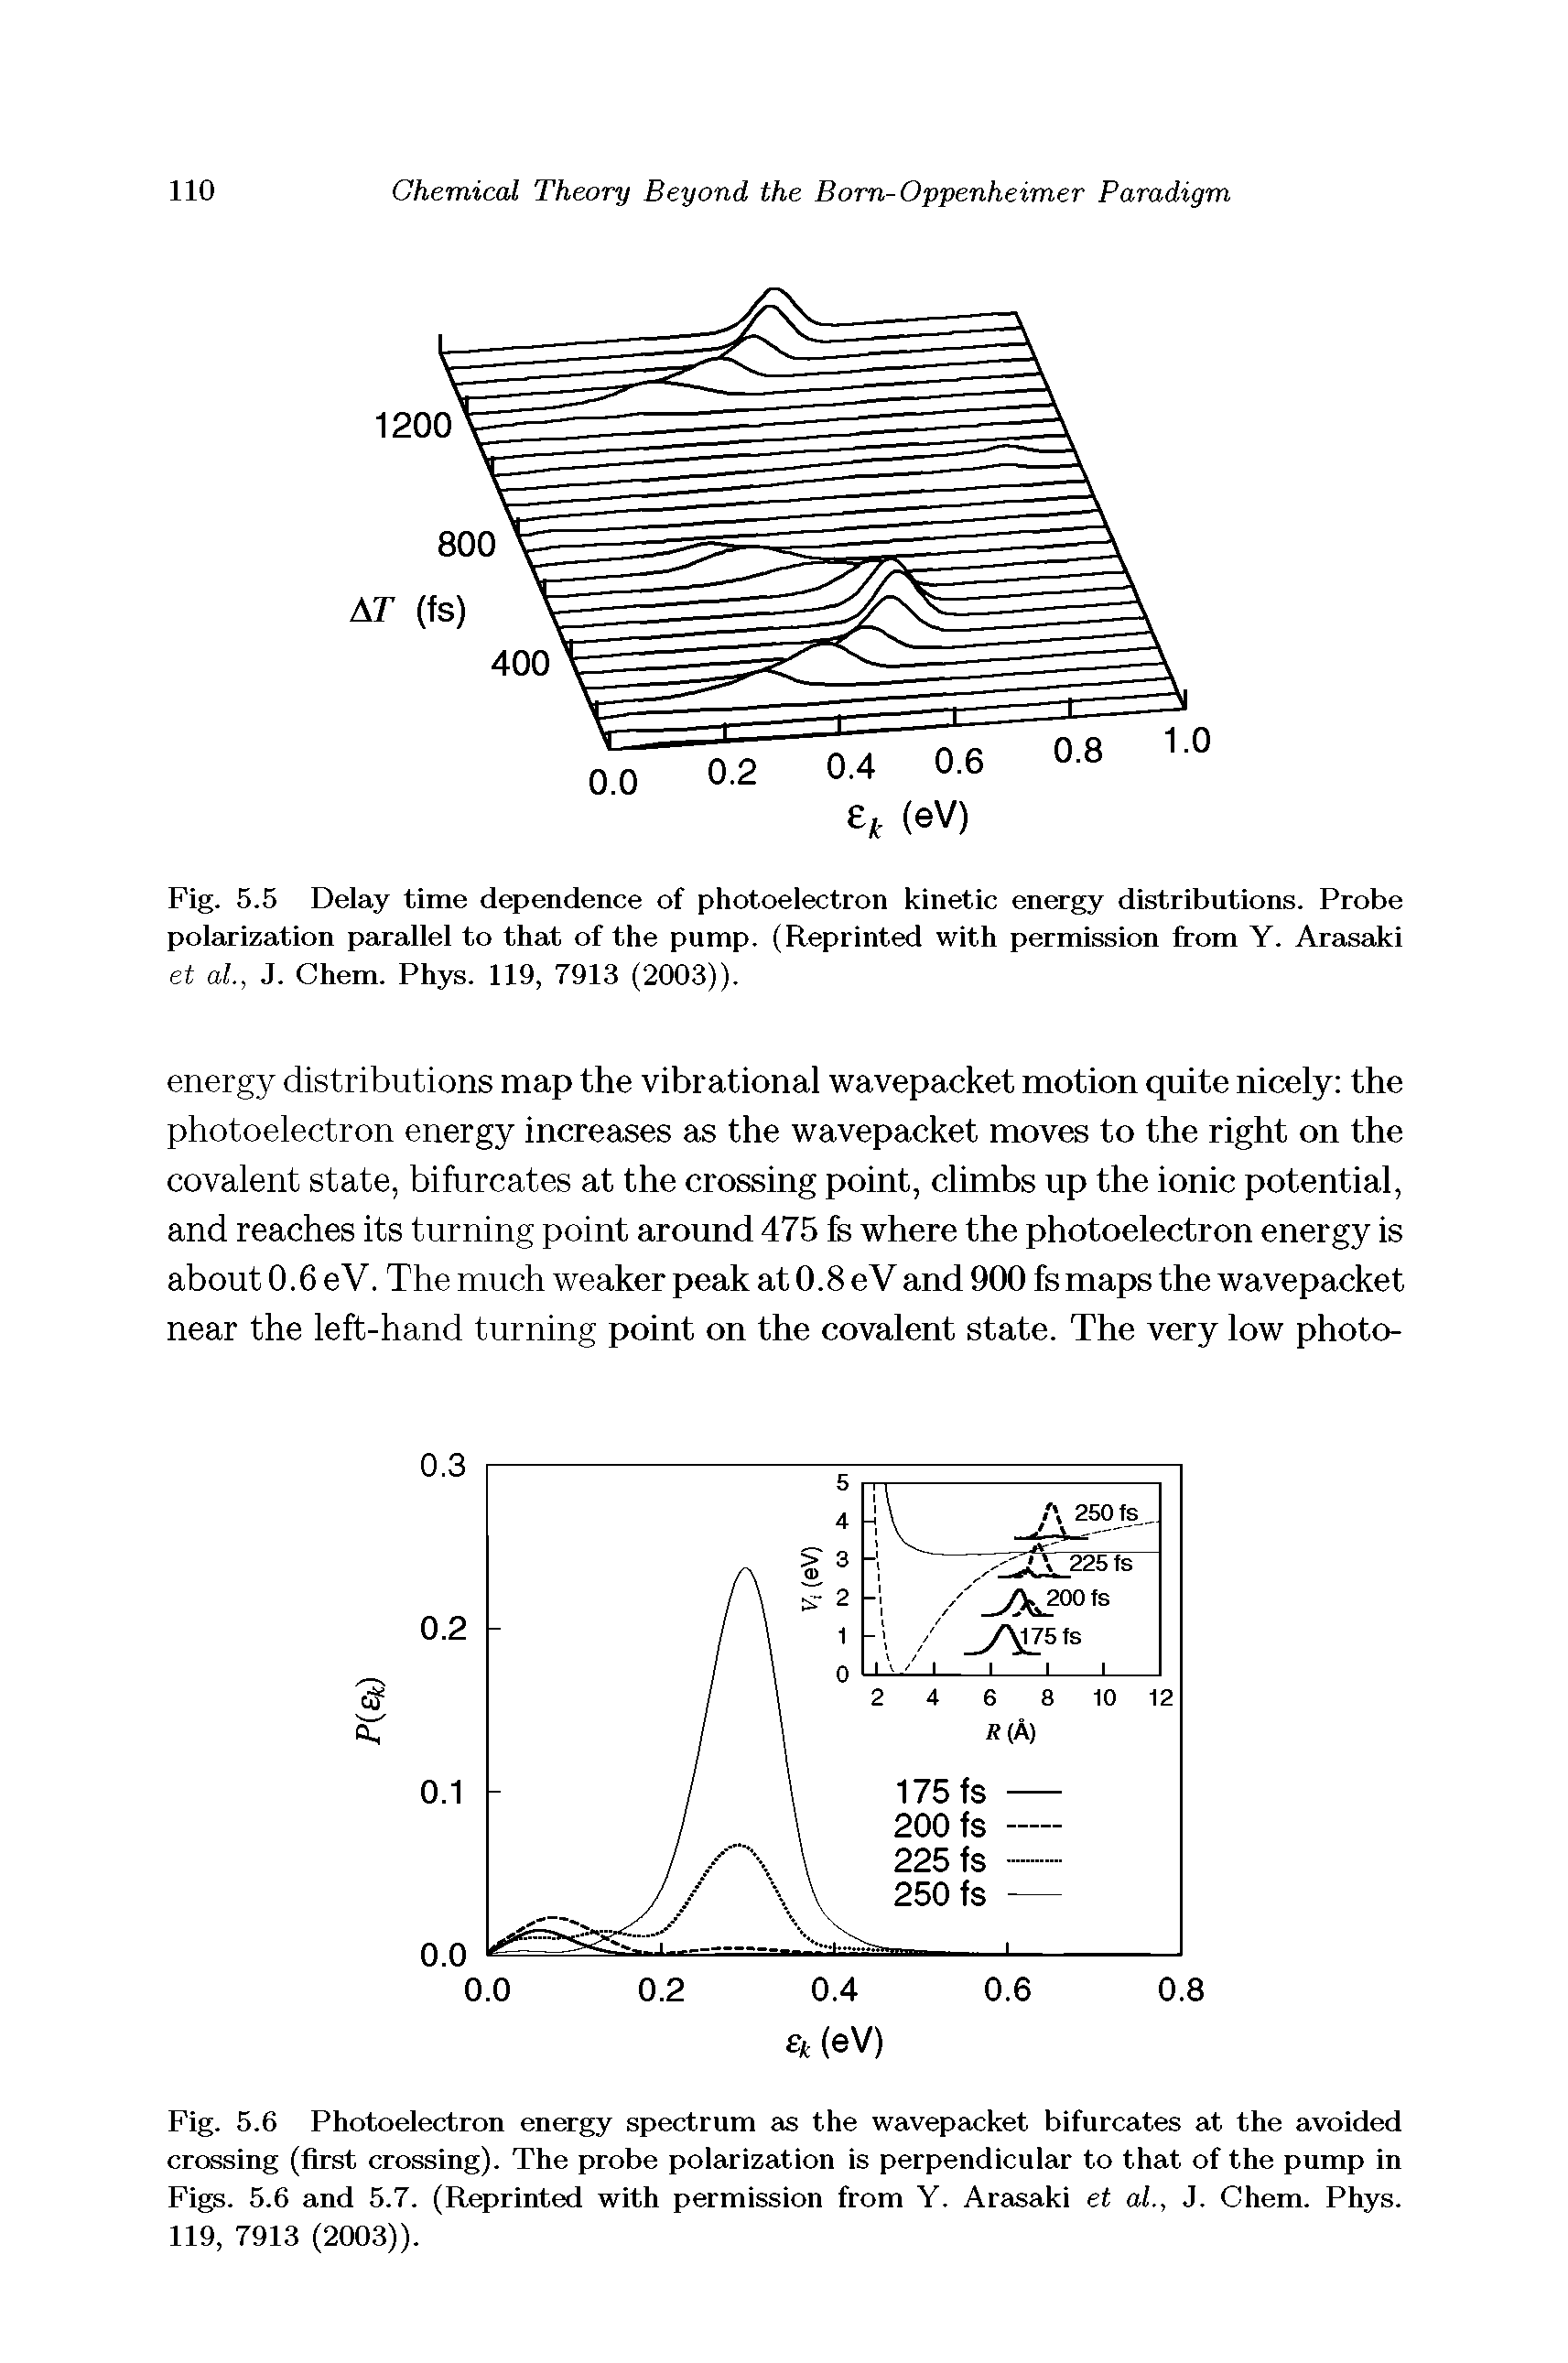 Fig. 5.5 Delay time dependence of photoelectron kinetic energy distributions. Probe polarization parallel to that of the pump. (Reprinted with permission from Y. Arasaki et al, J. Chem. Phys. 119, 7913 (2003)).